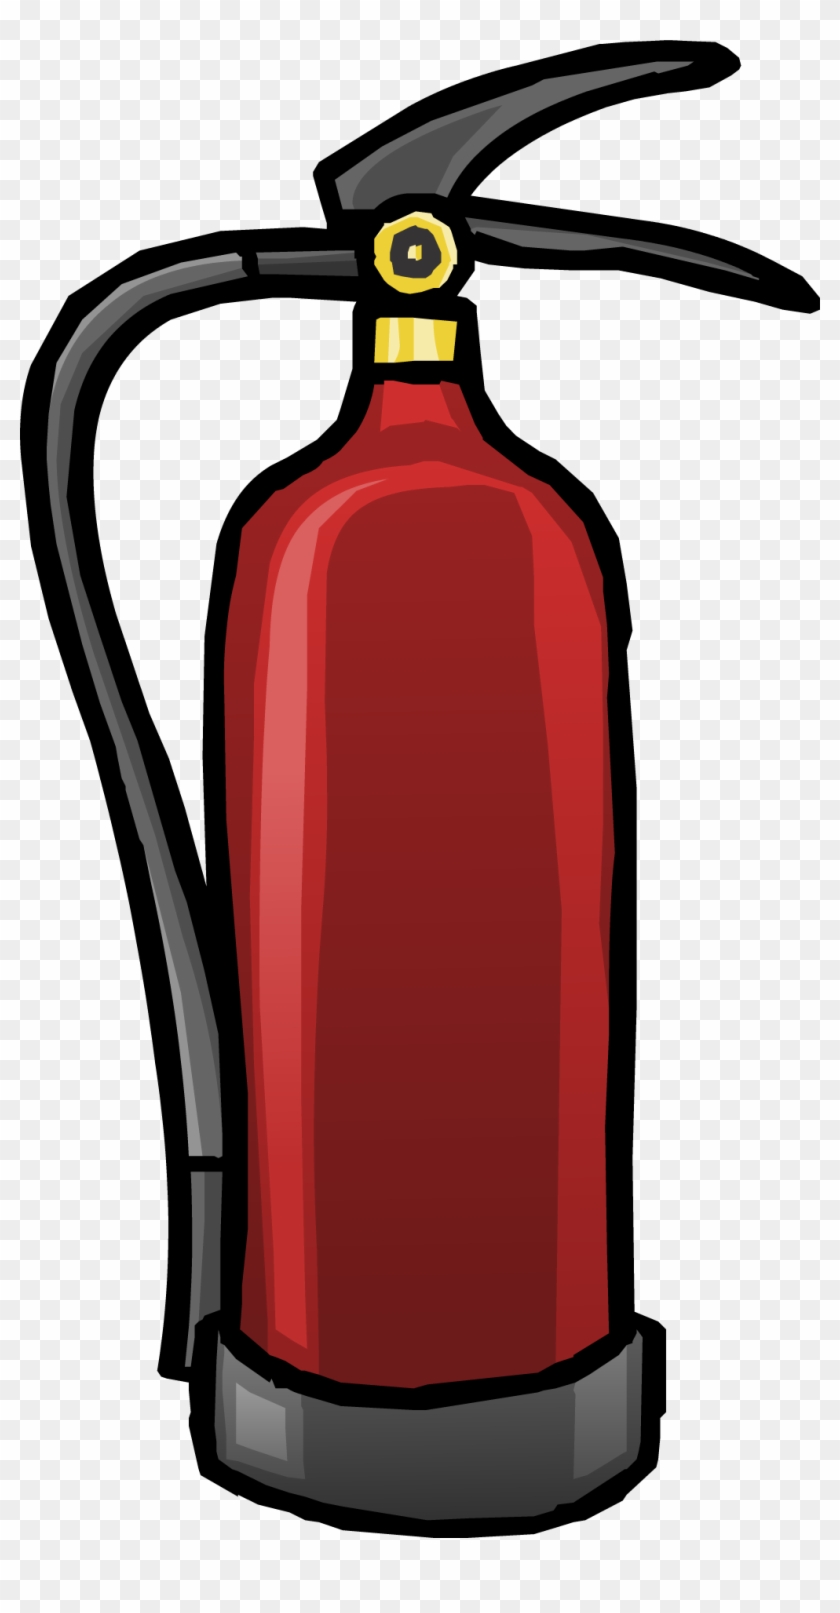 Extinguisher Png - Fire Extinguisher Png #189748